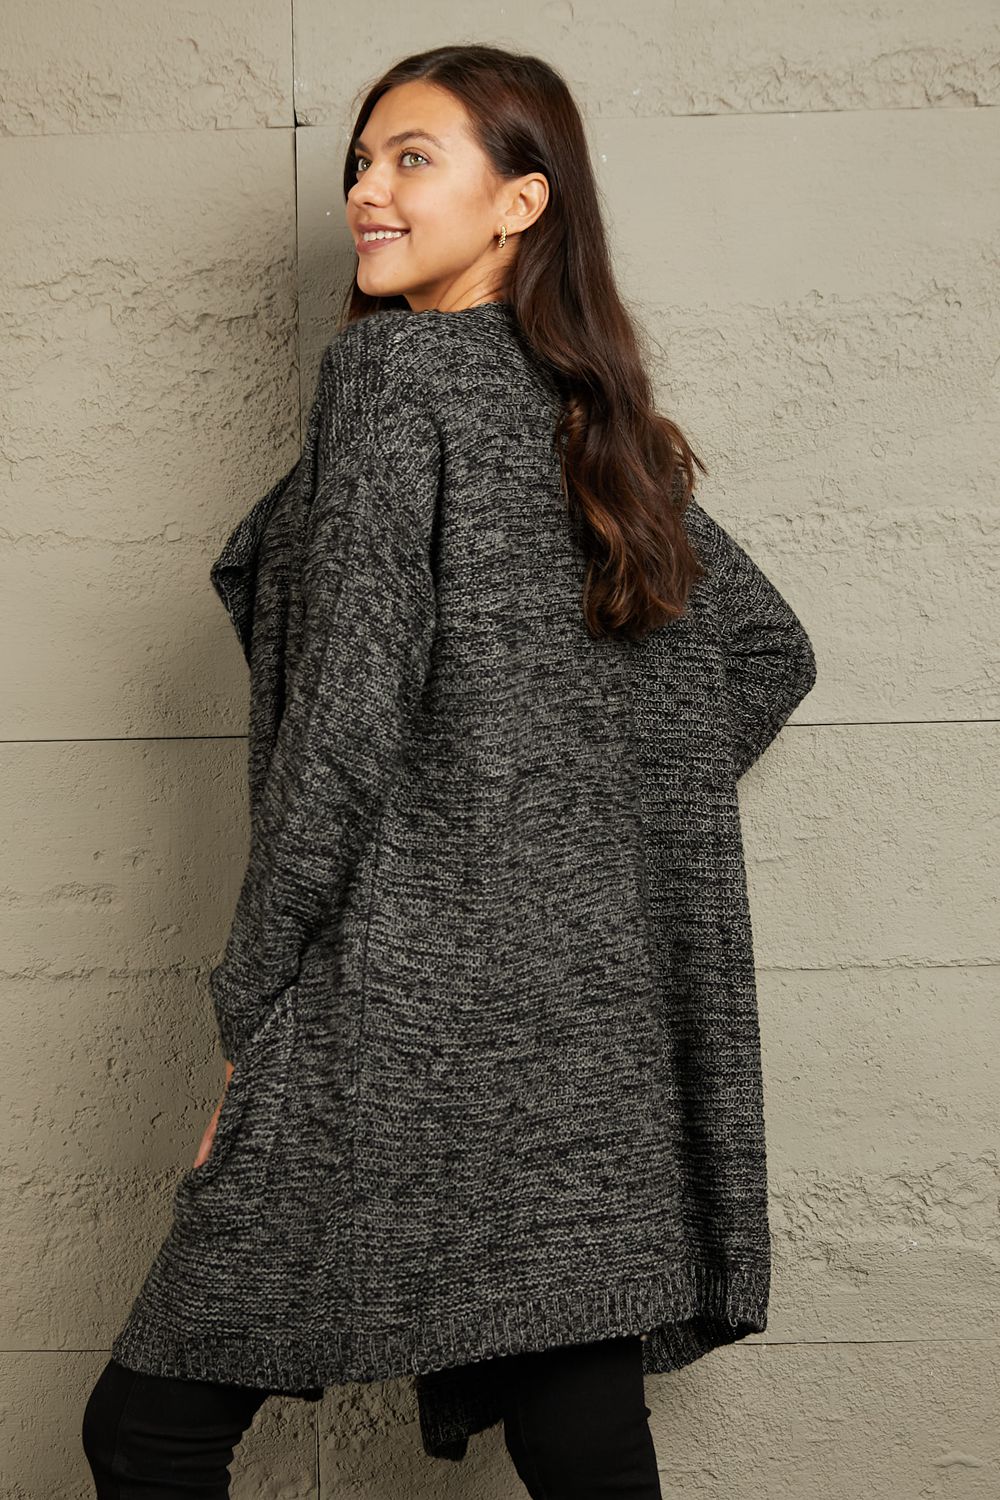 This cardigan envelops you in warmth while exuding a relaxed, yet chic vibe. Its chunky knit texture adds a touch of rustic charm, making it a versatile piece for both casual outings and snug nights in.